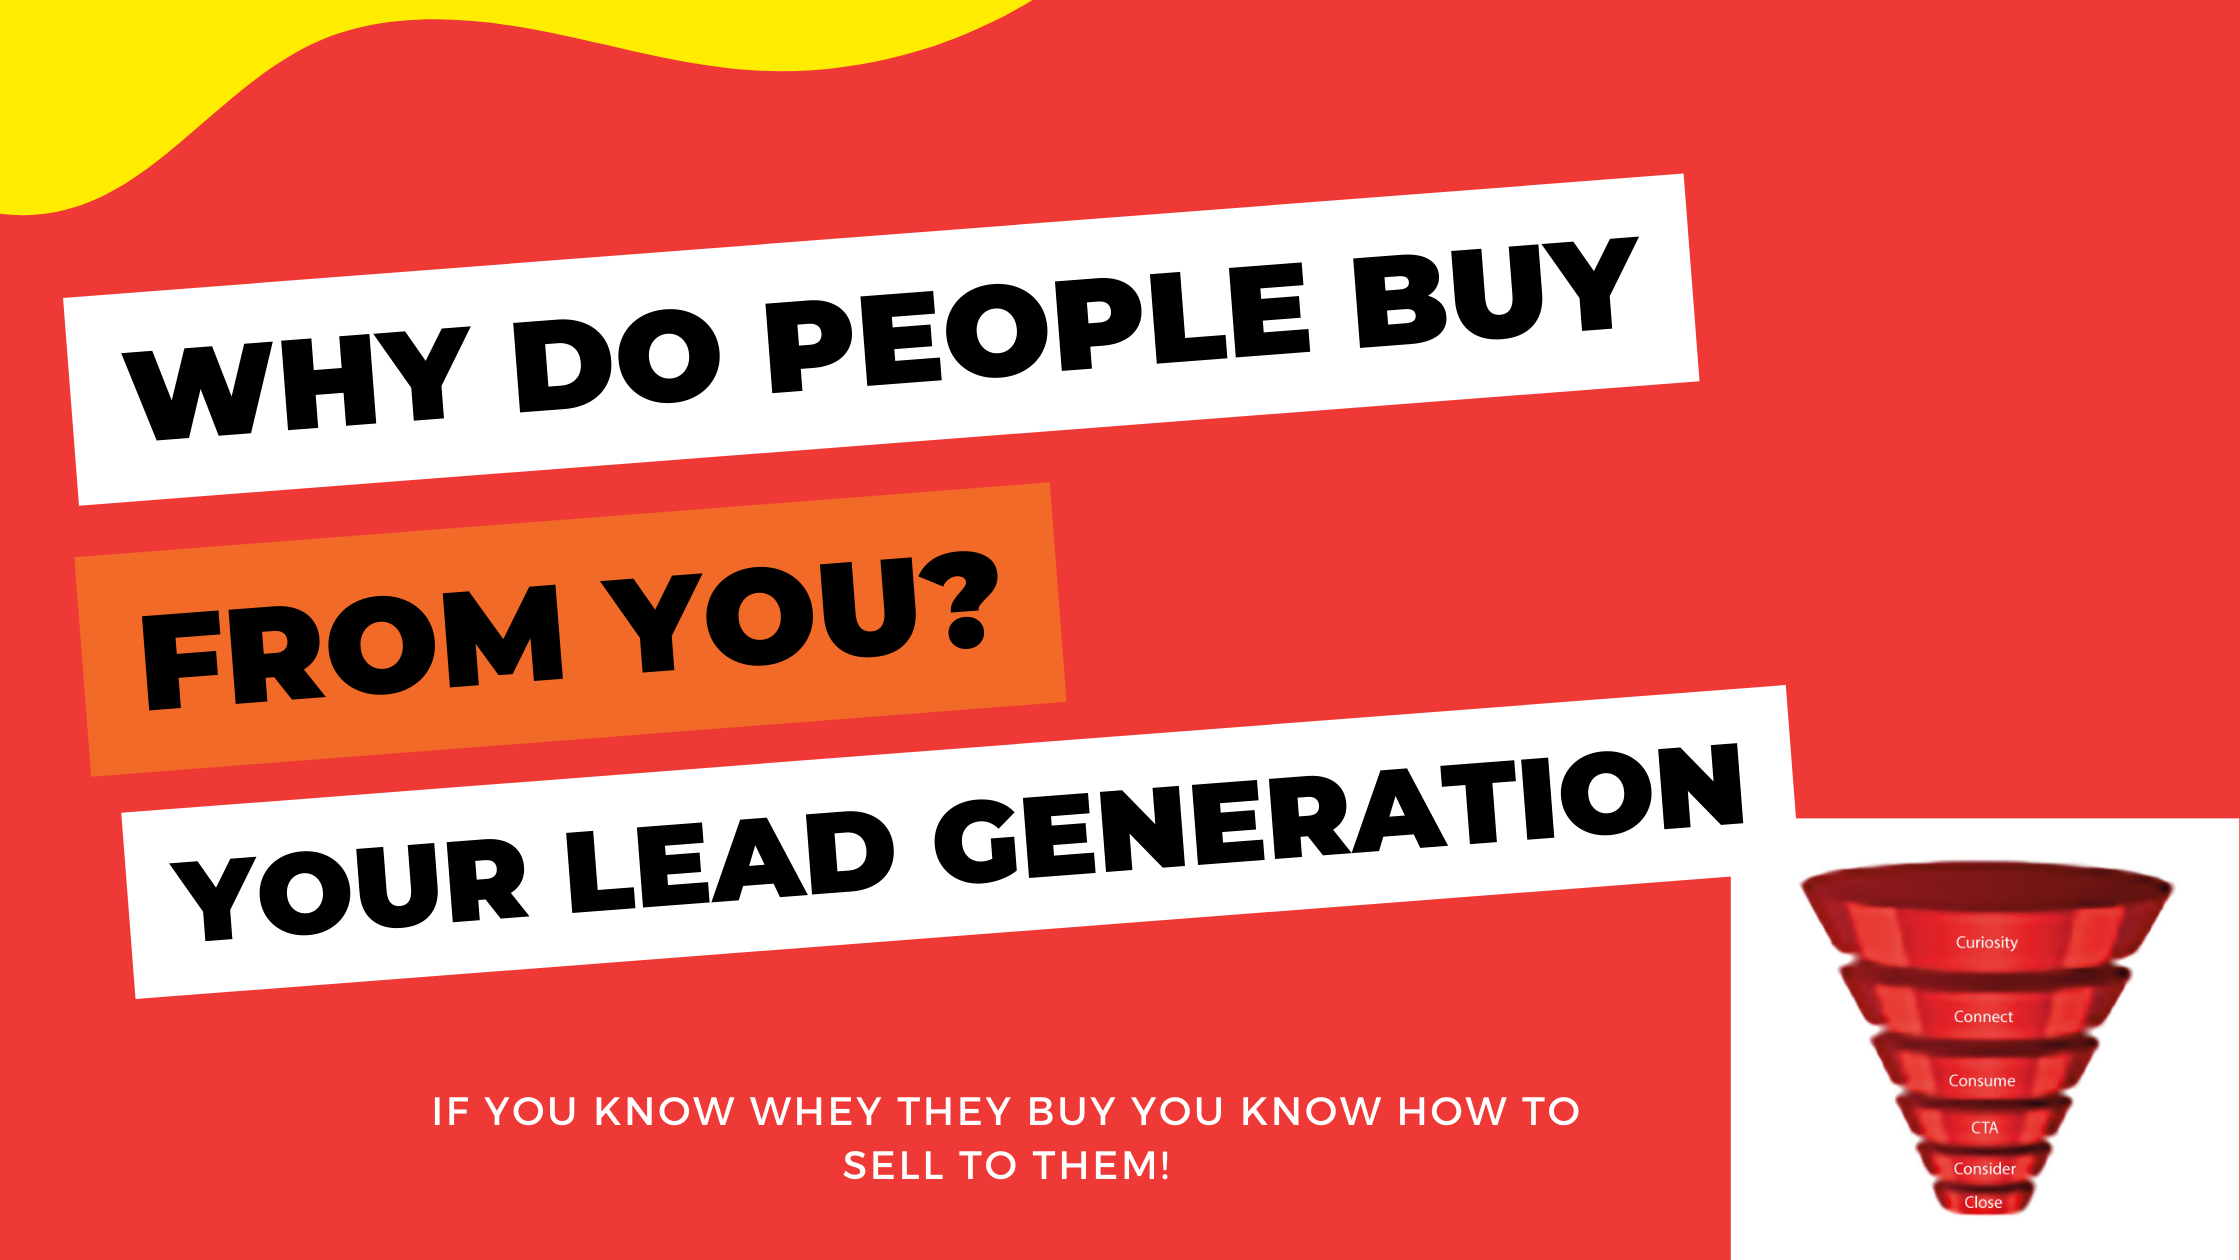 Why do people buy from you is a key factor in building a great lead generation strategy